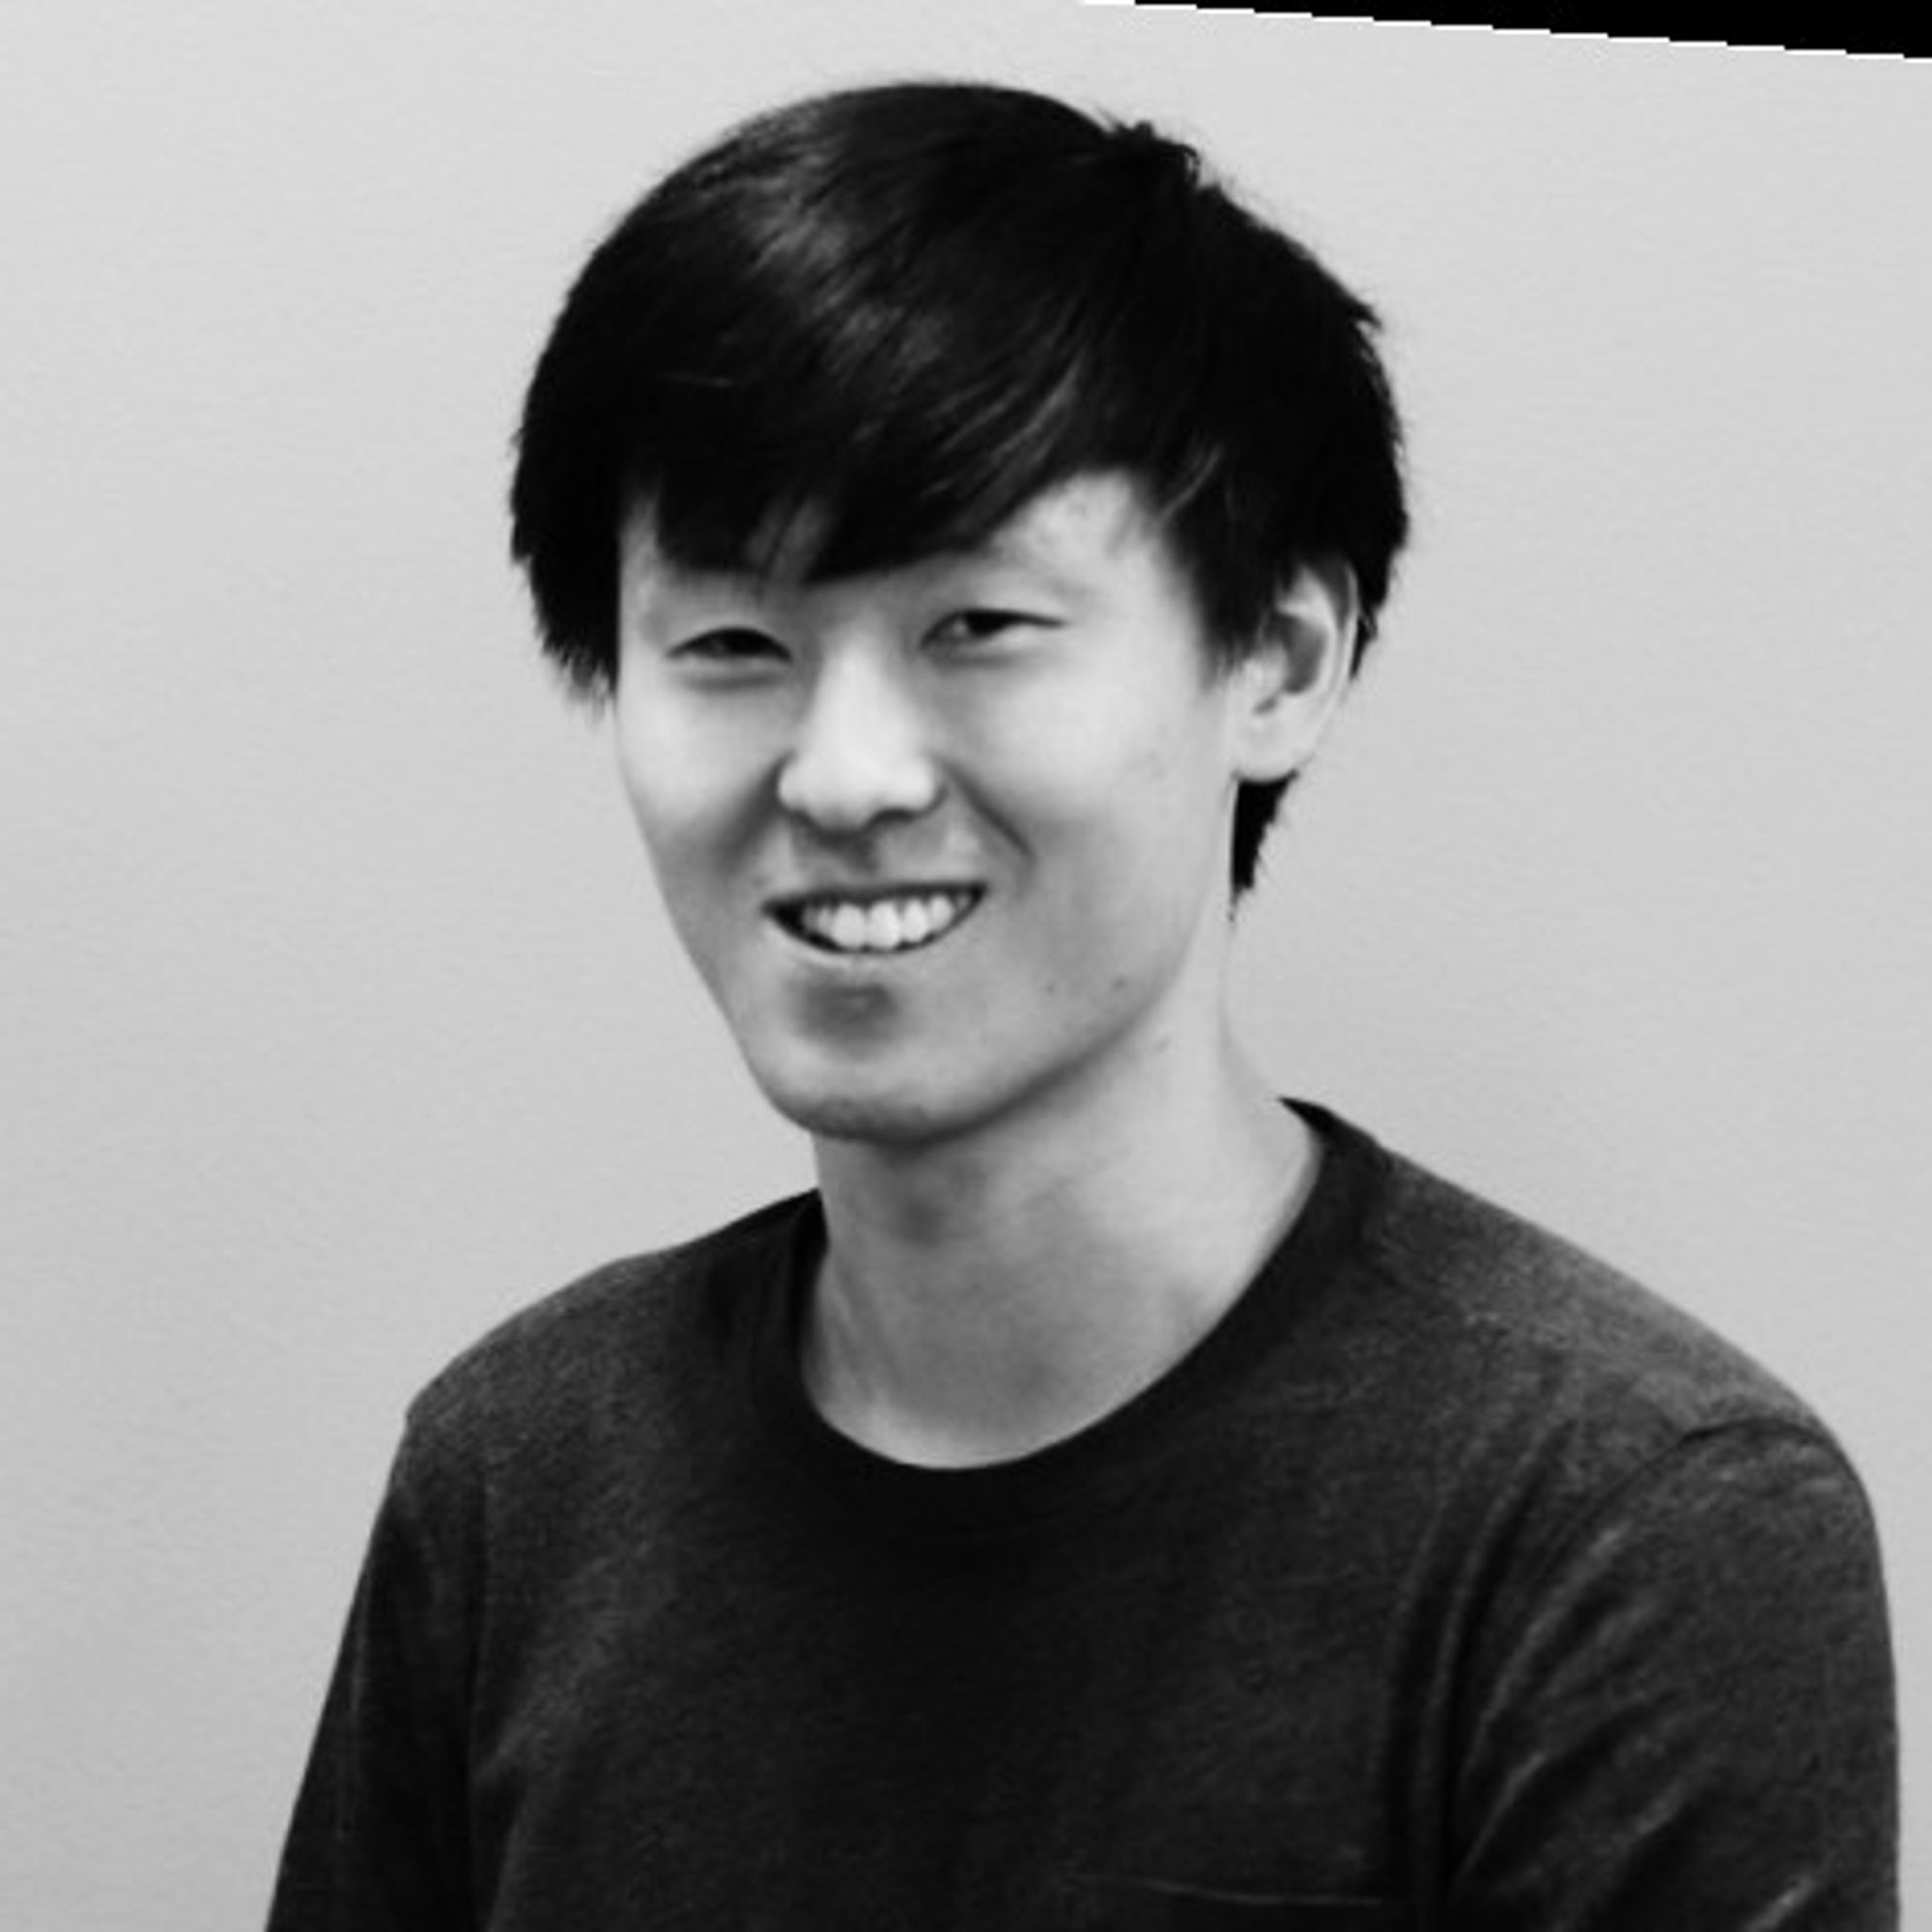 Ken Noh
Software Engineer
Former Eng @ IMC Trading • Loves volleyball, tennis, and the Warriors